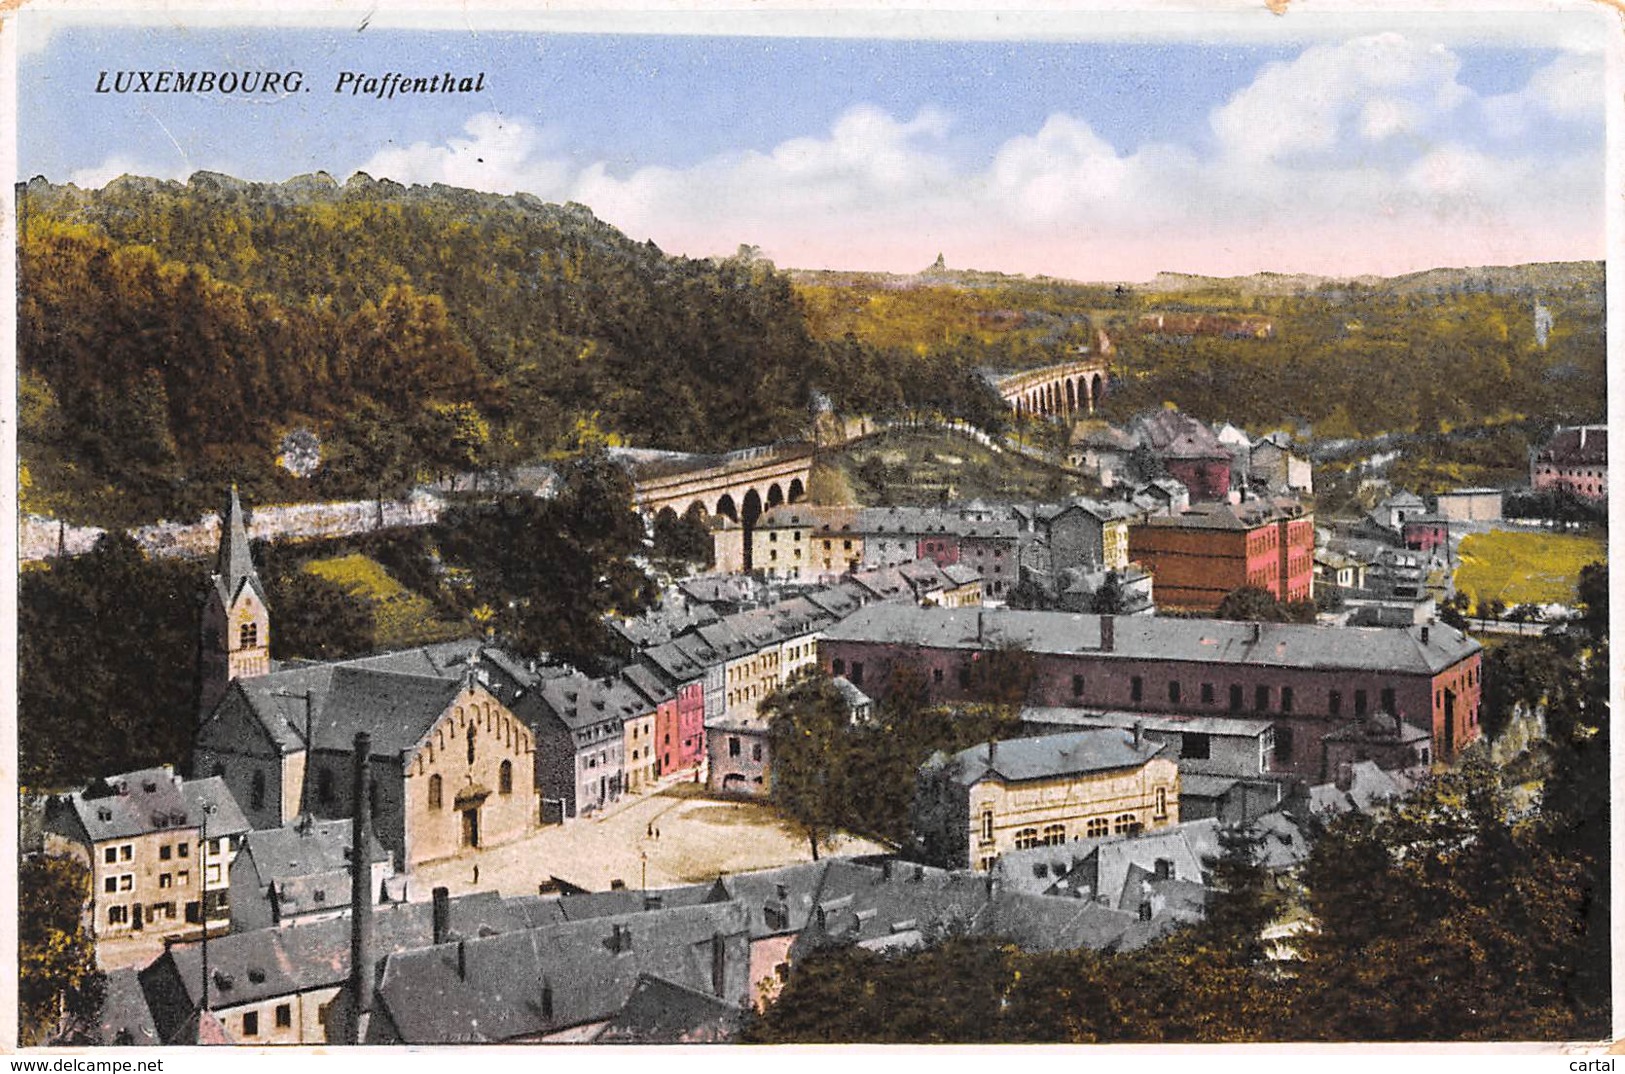 LUXEMBOURG - Pfaffenthal - Luxembourg - Ville